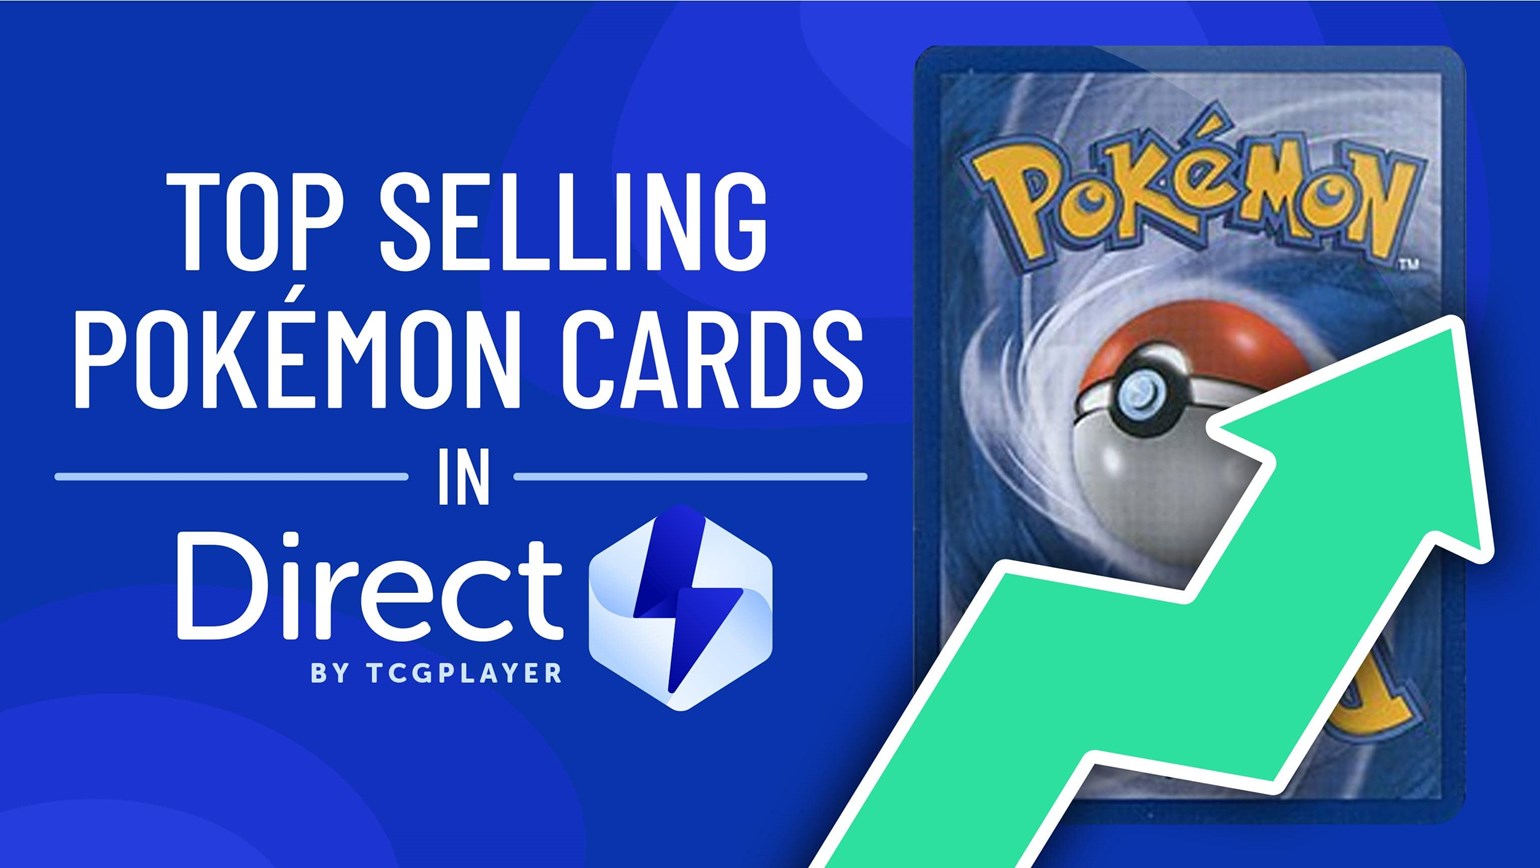 February Top Selling Pokémon Cards in Direct by TCGplayer